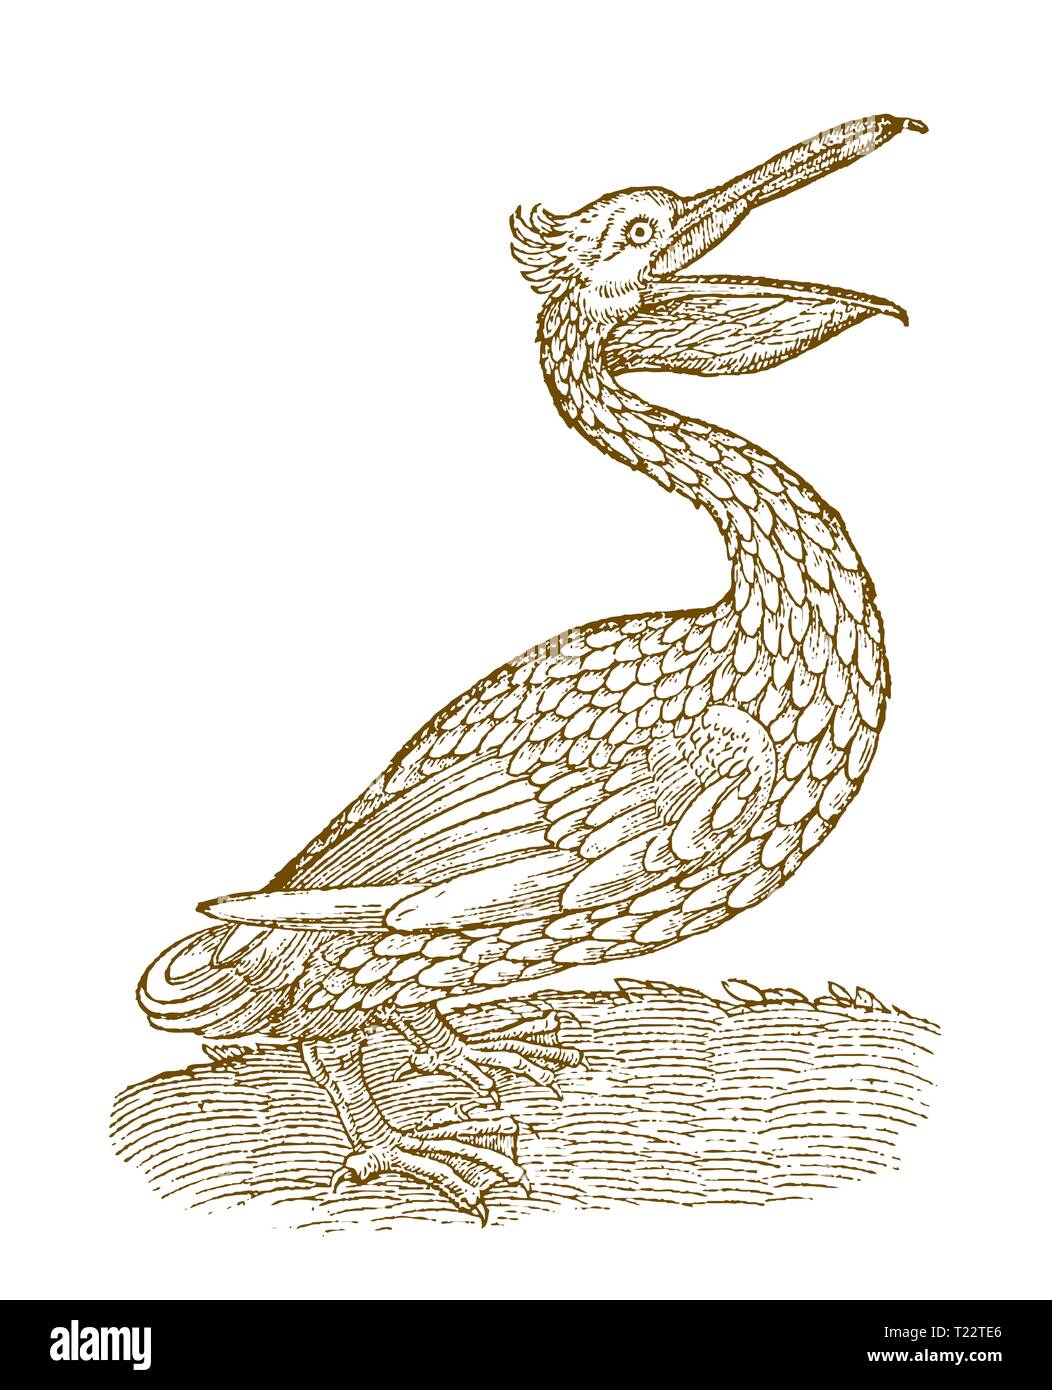 Pelican in side view with opened beak. Illustration after a historic woodcut from the 16th century Stock Vector